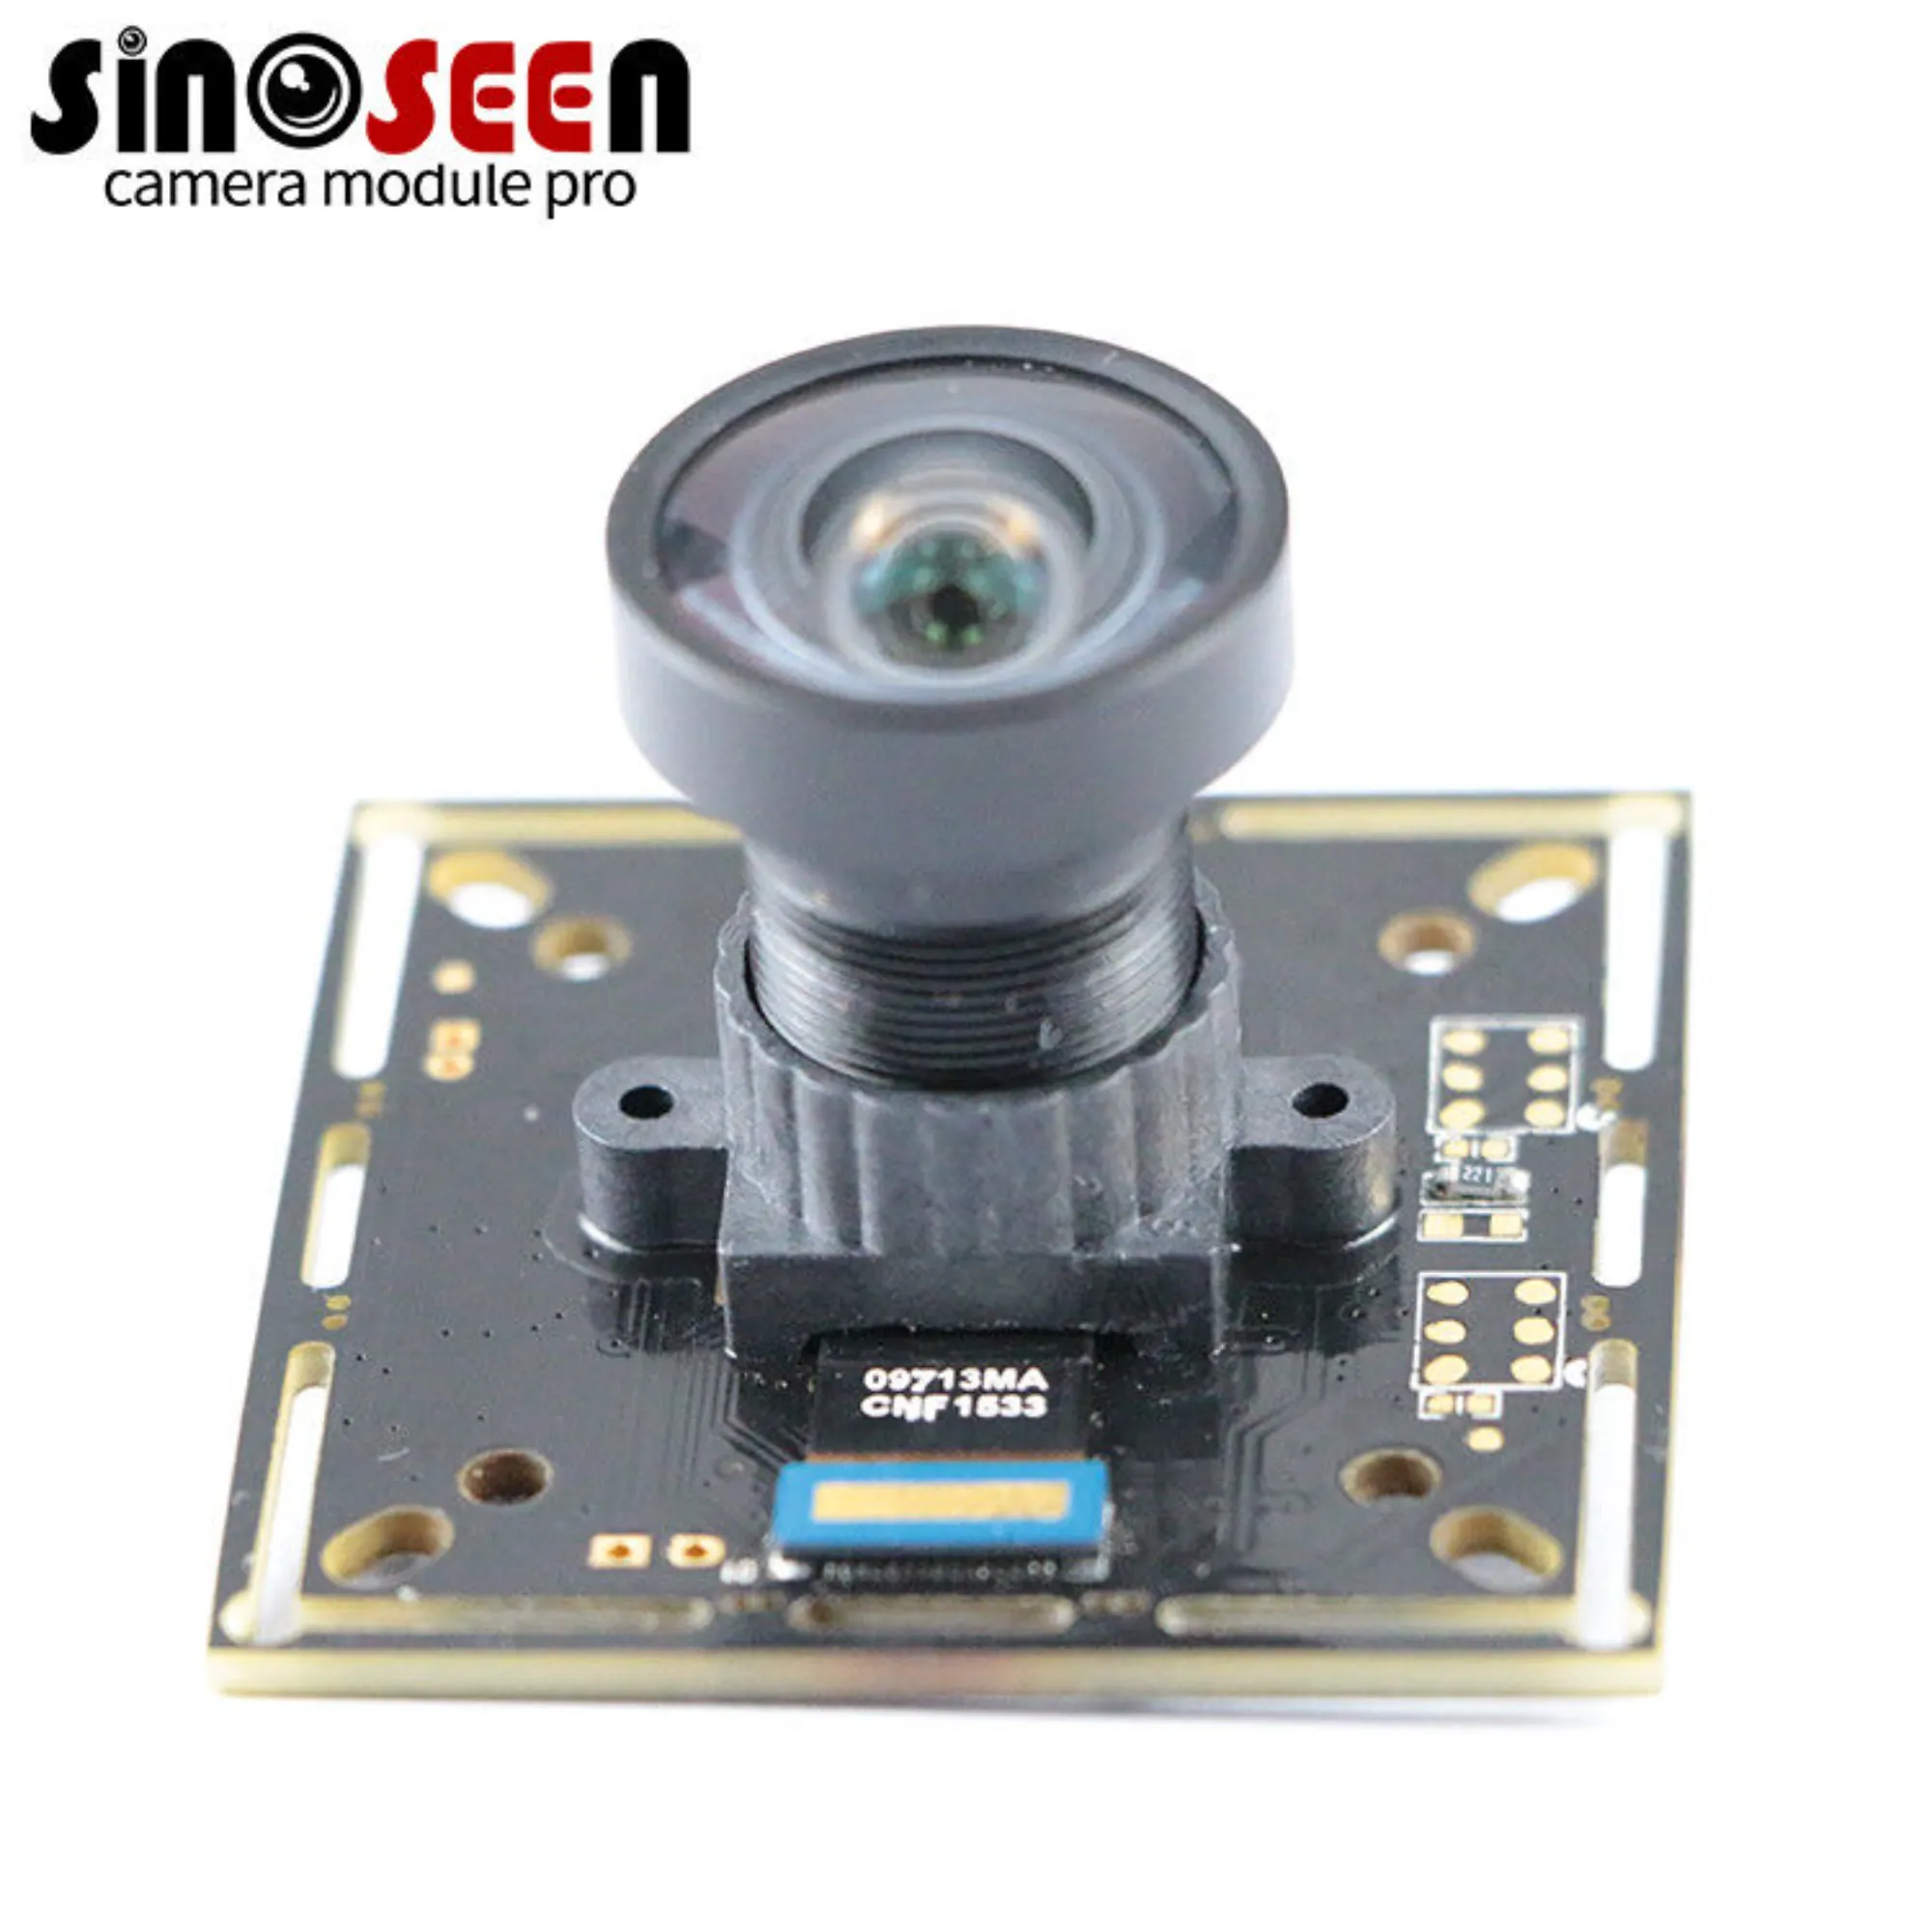 Camera Module with Sony IMX214 Sensor 13MP HD Wide Angle Fixed Focus